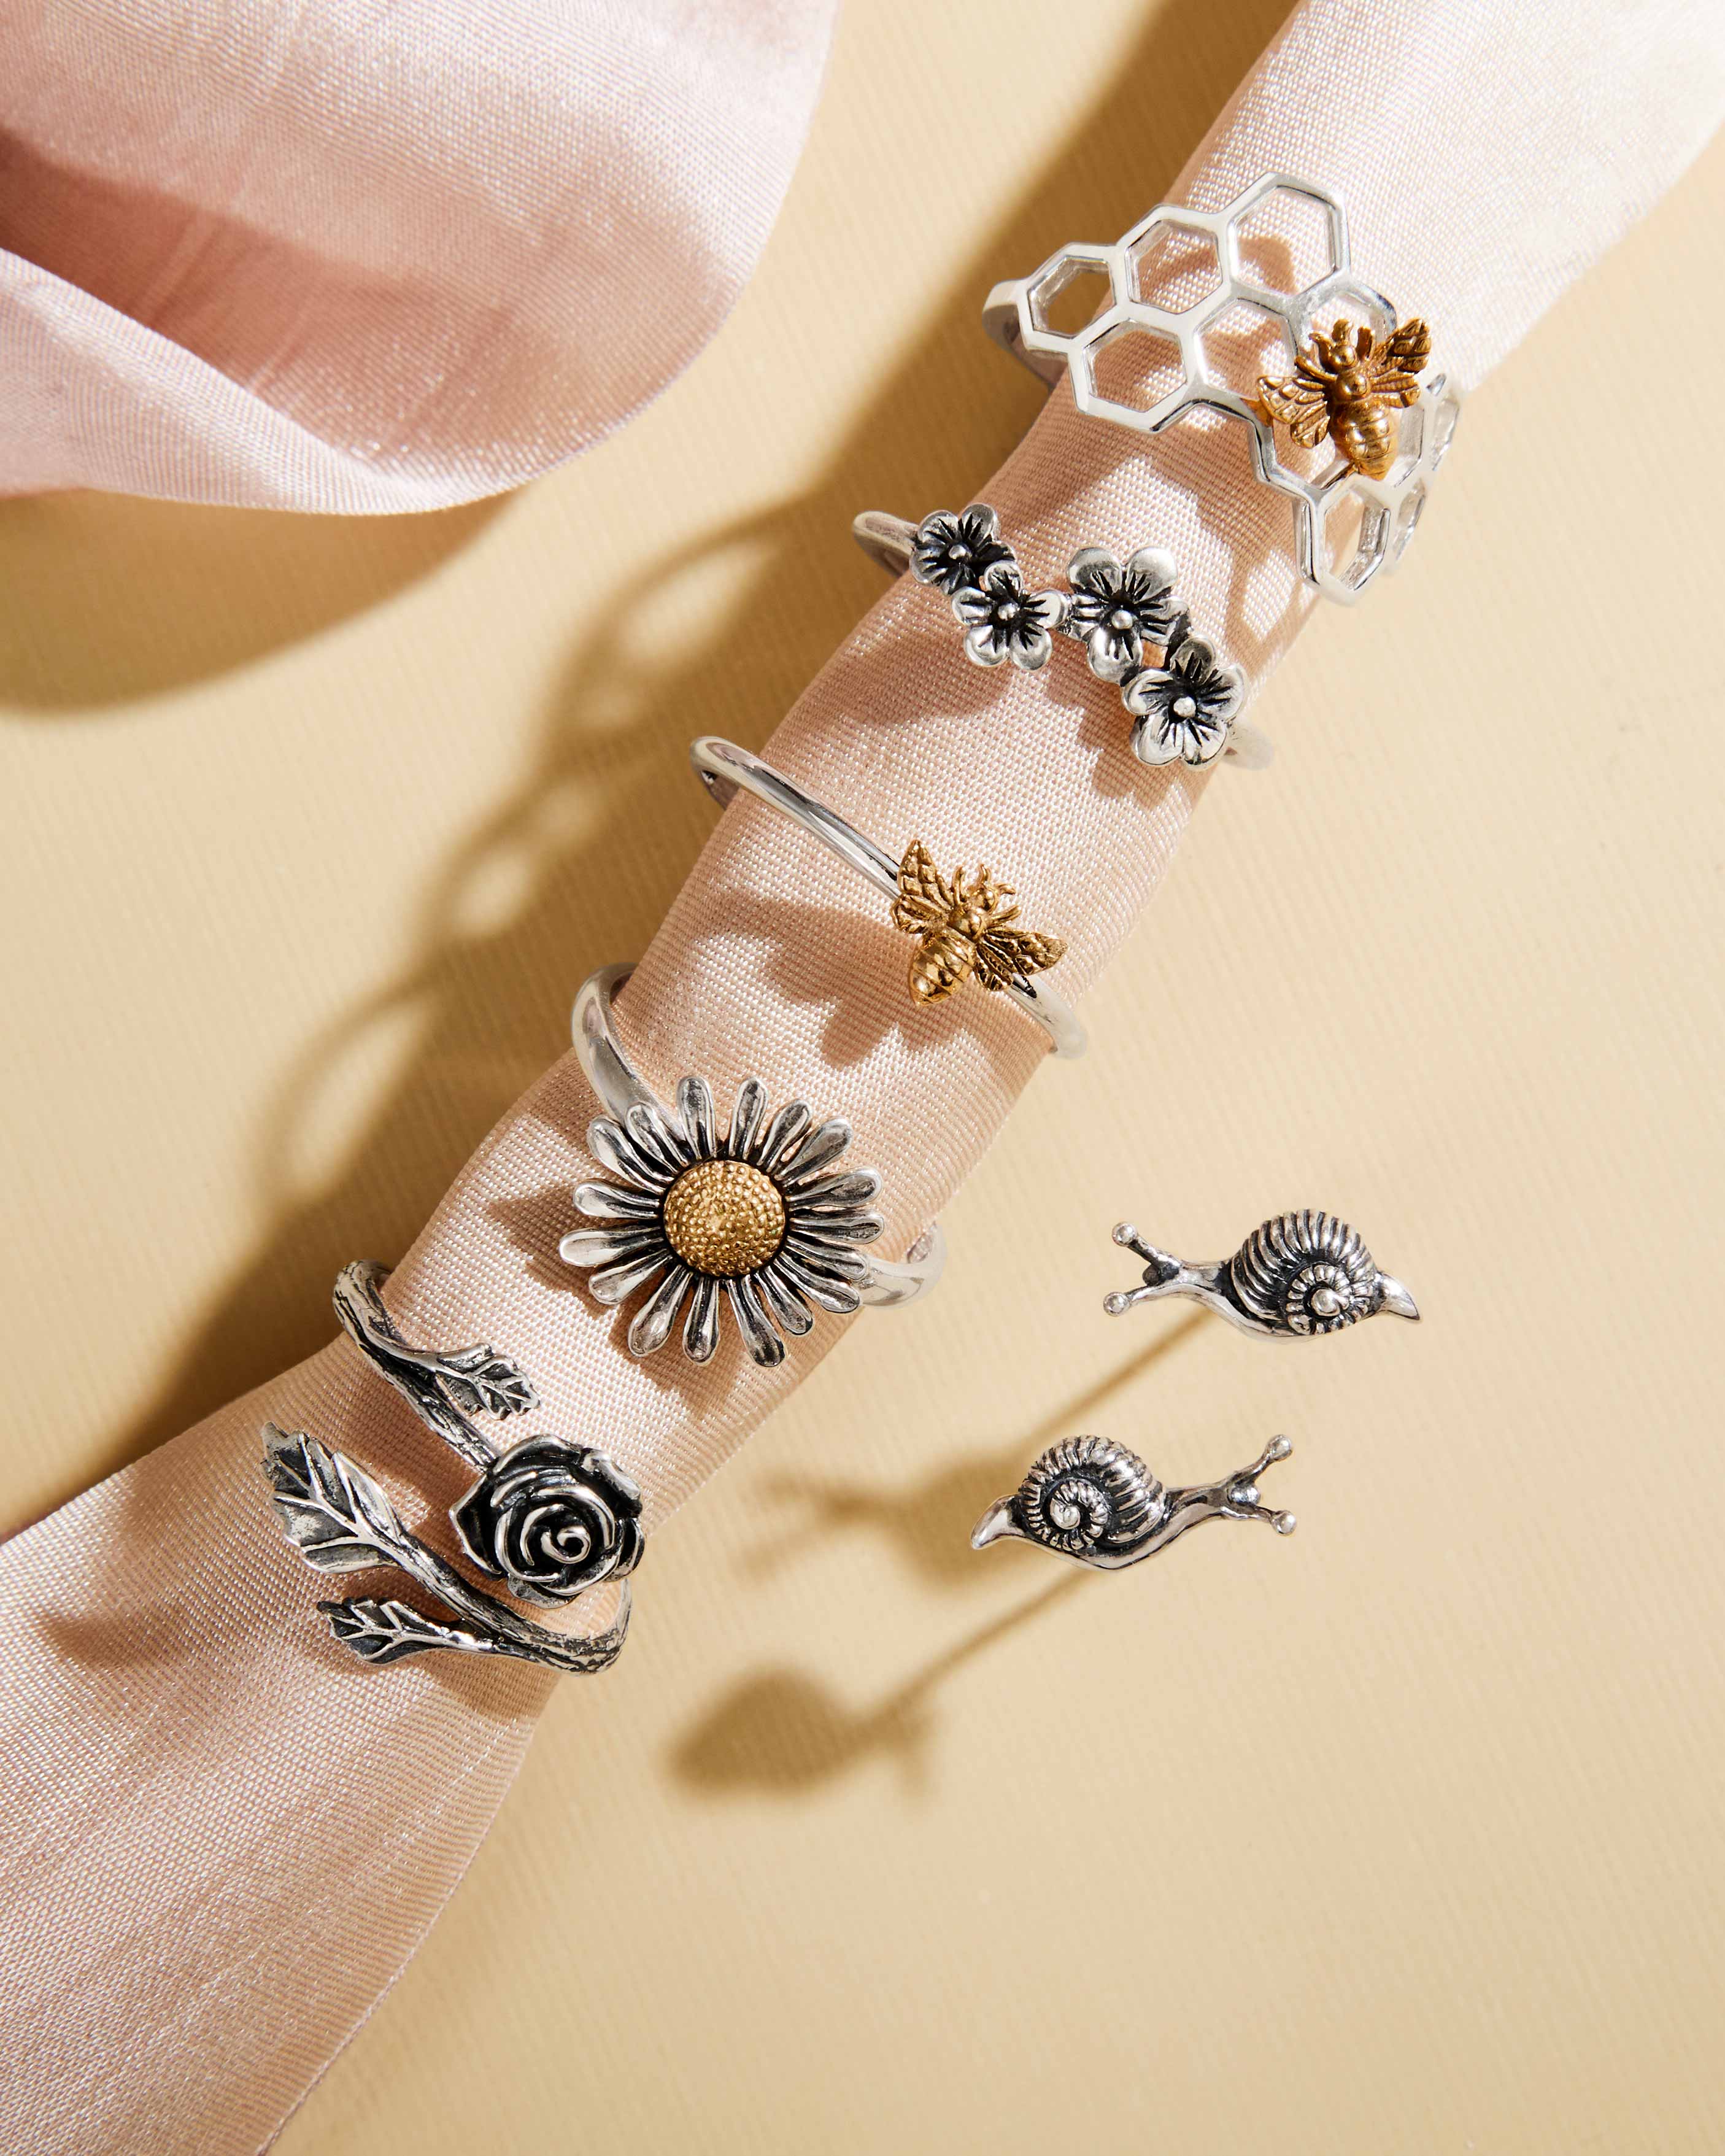 Collection of Bee Ring, Flower Rings and Earrings